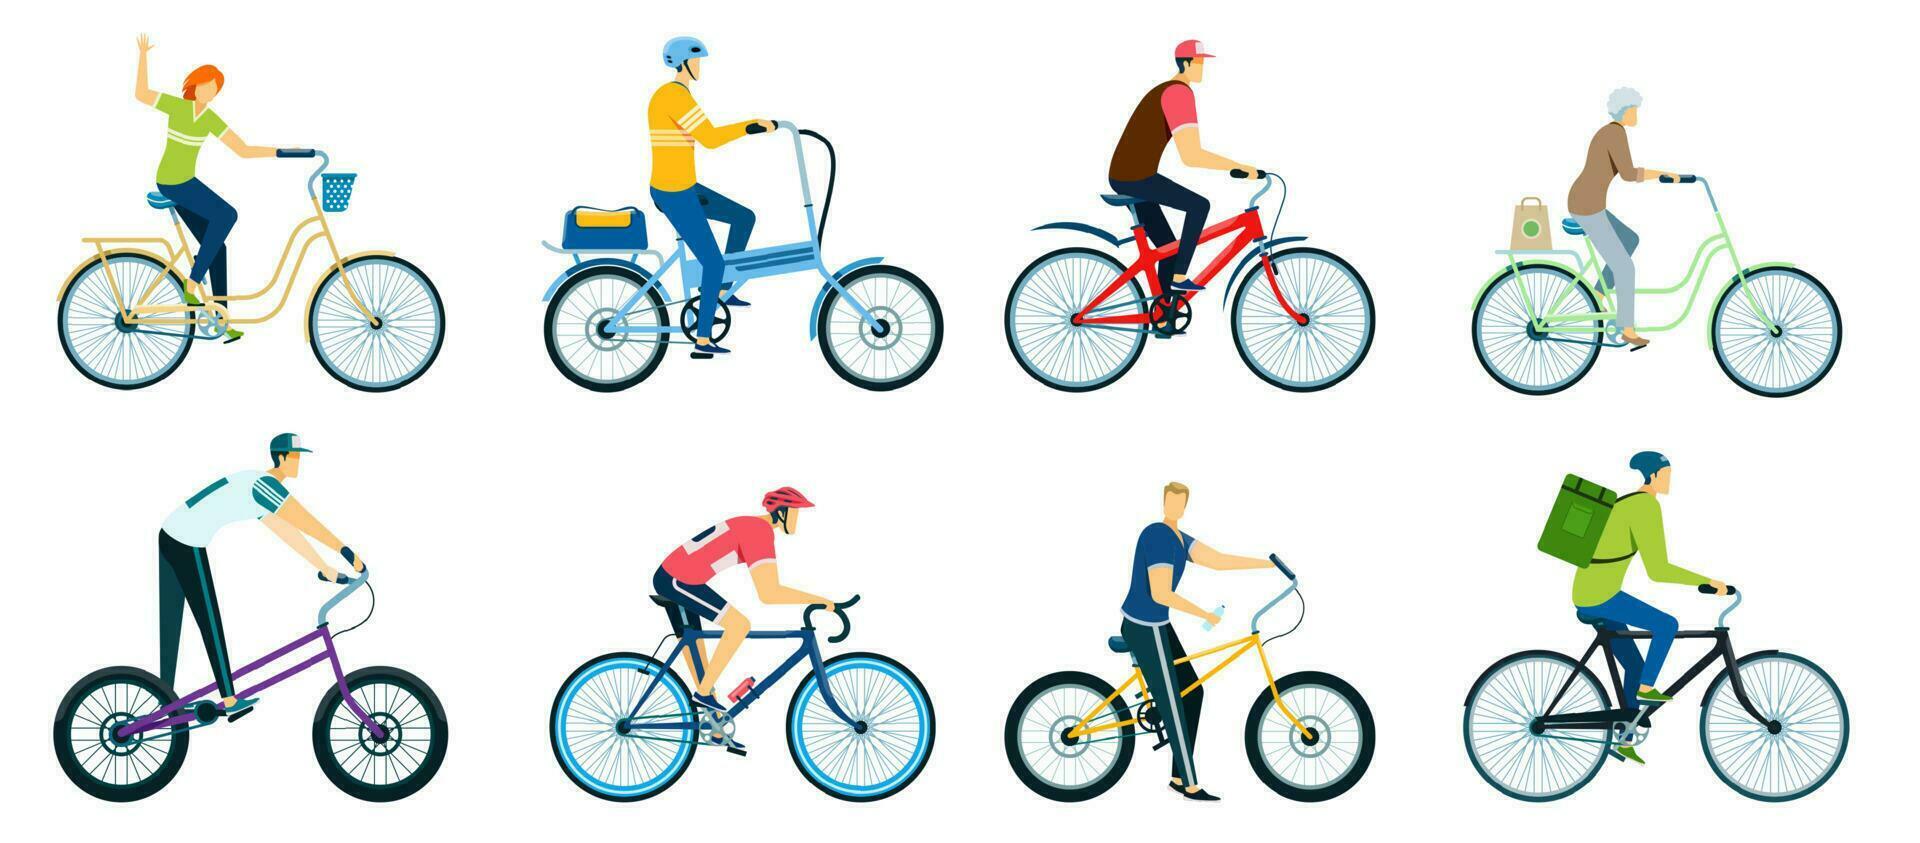 People cycling, characters riding bicycles, cyclists on bikes. Men and women biking in park, bicycle riders, delivery man on bike vector set